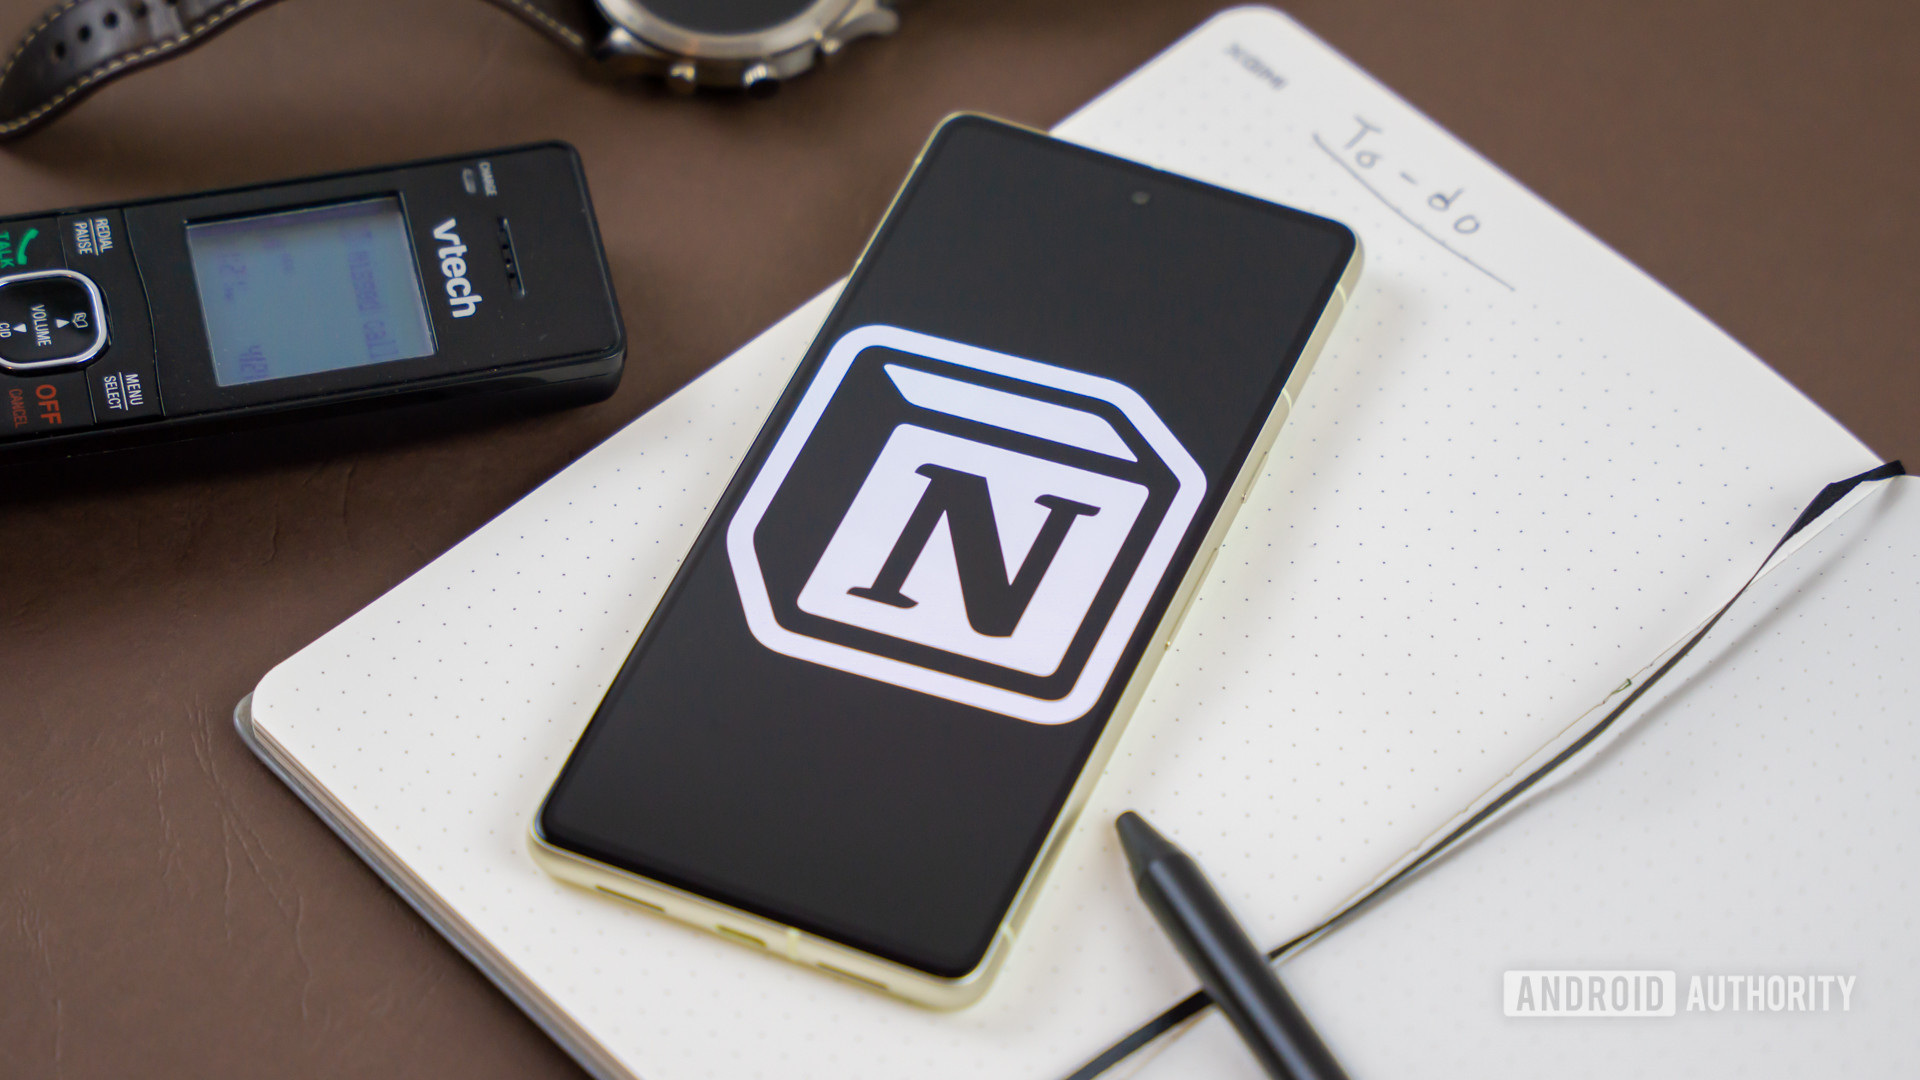 Notion logo on smartphone next to other office products Stock photo 2